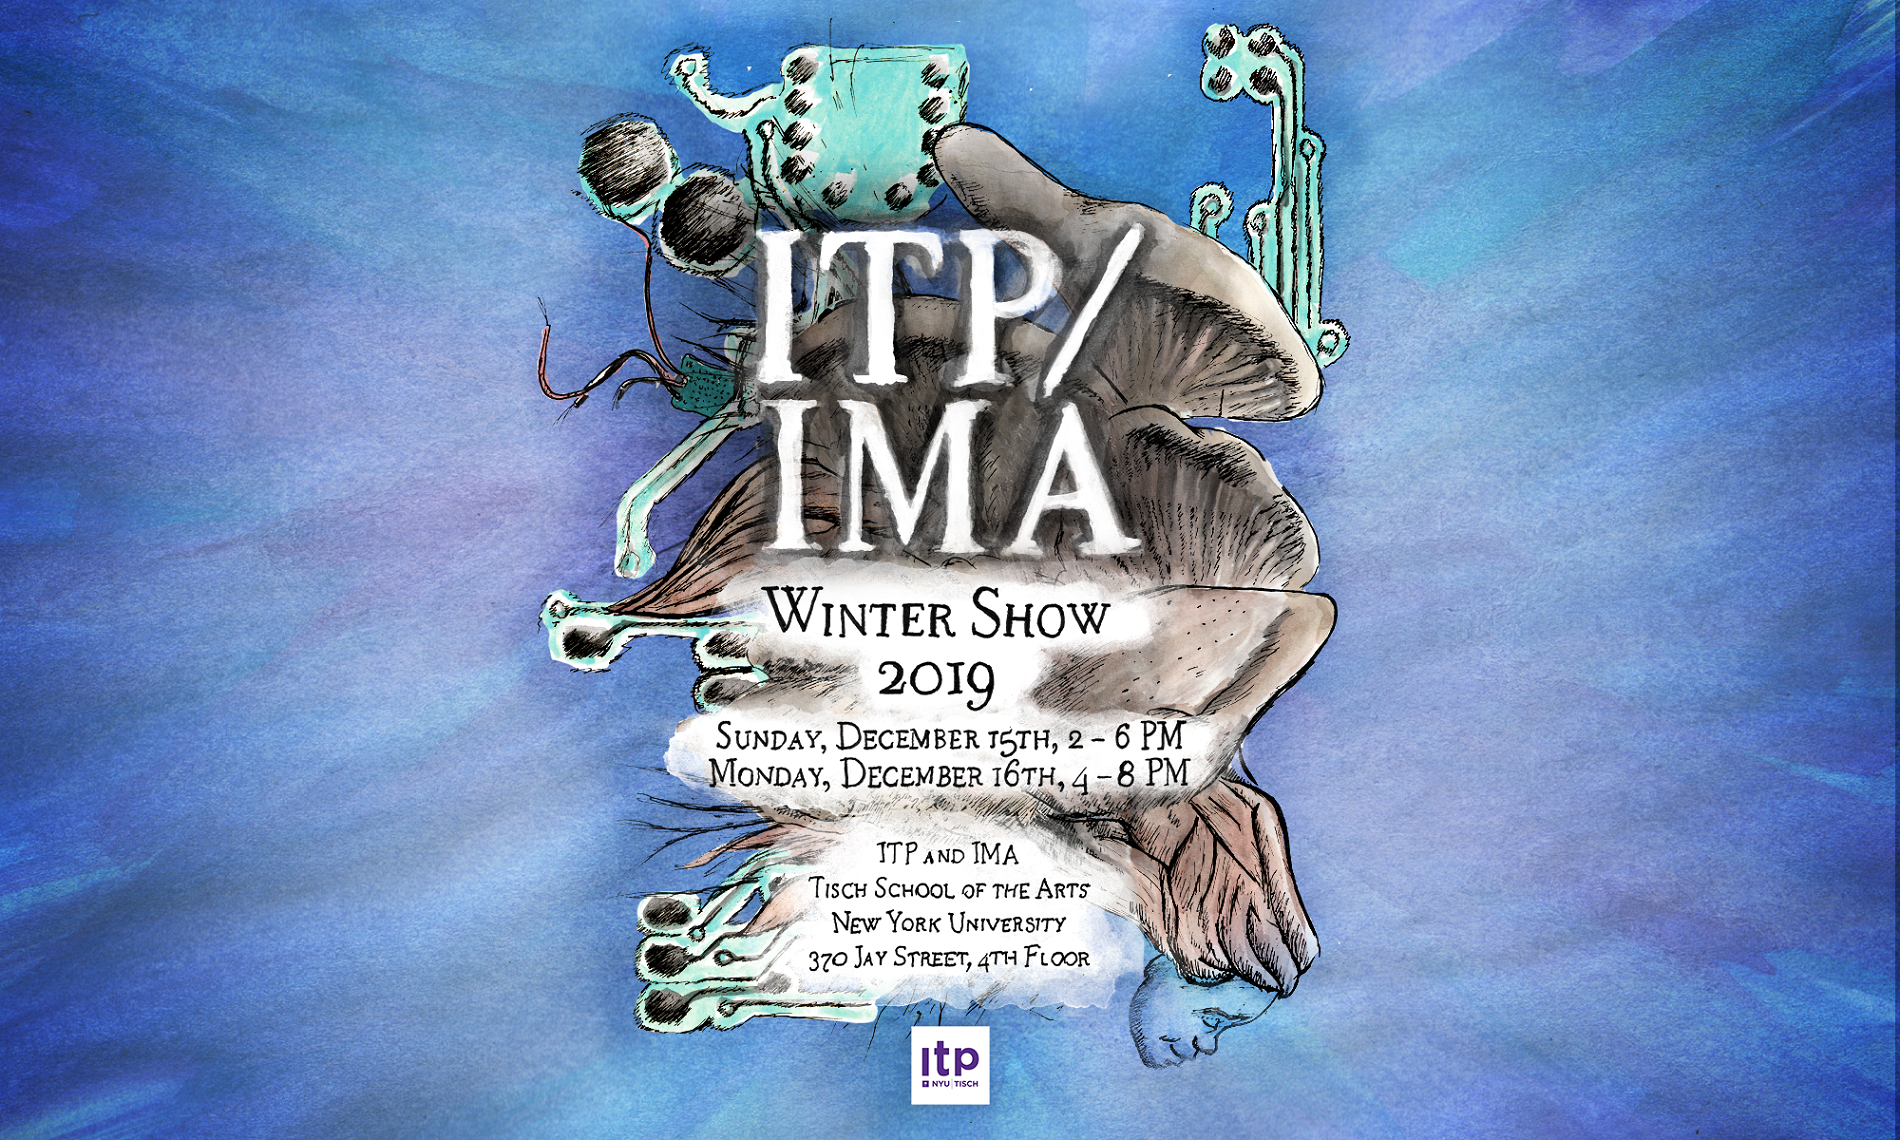 Image of ITP/IMA Winter Show 2019 Poster.